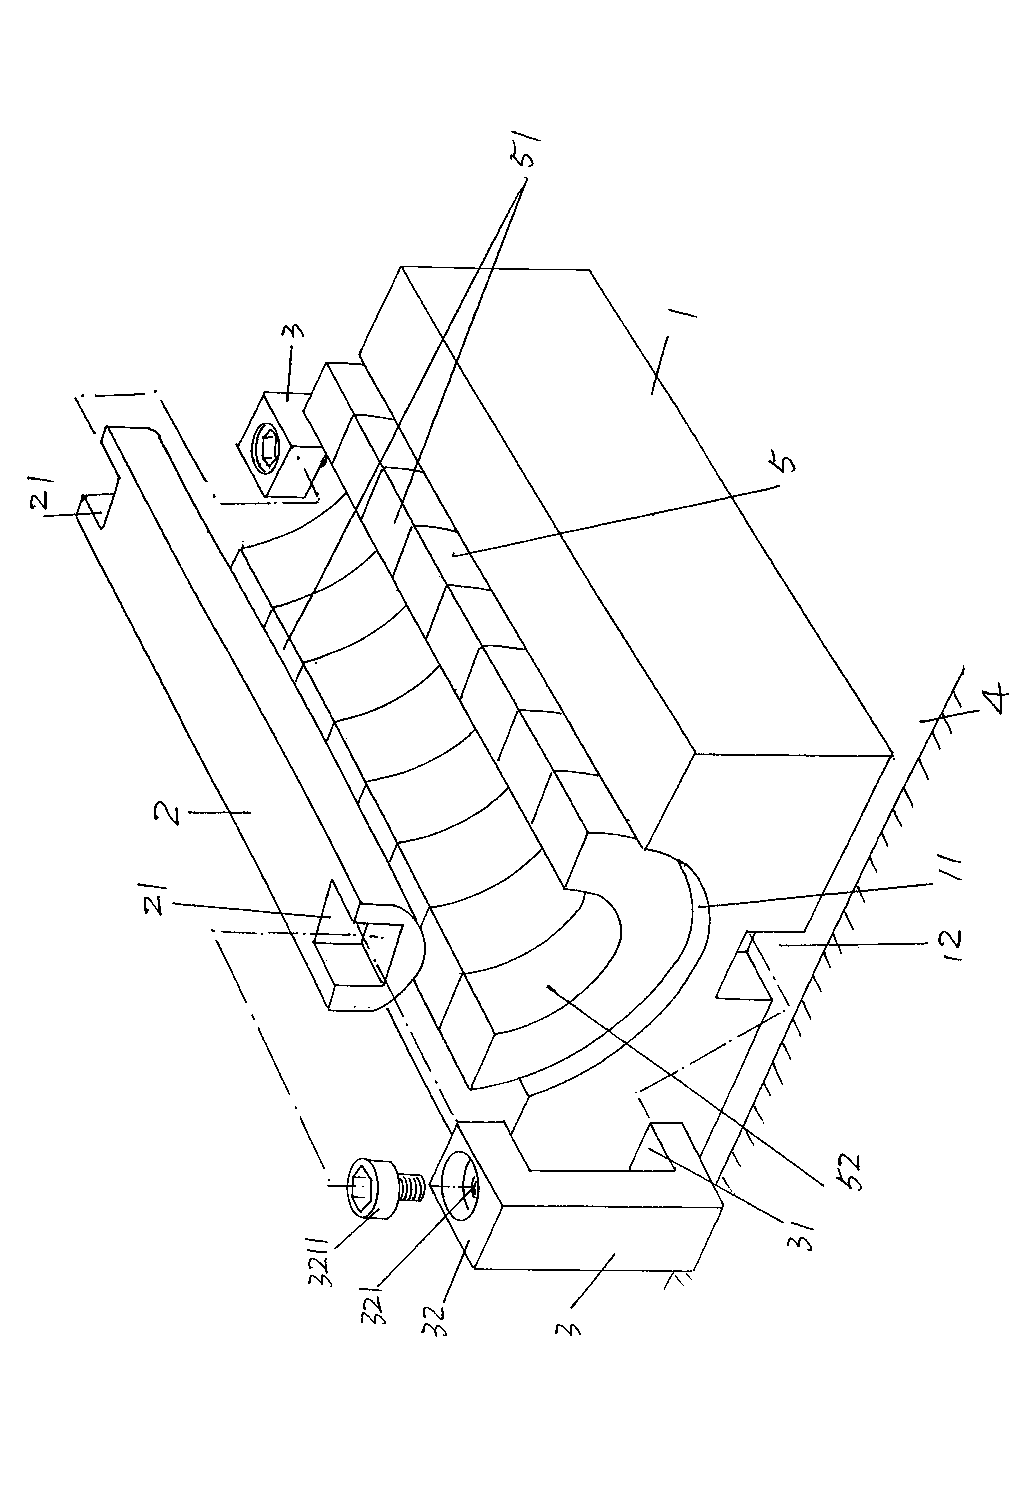 Clamp structure for C-shaped ferrite magnetic core